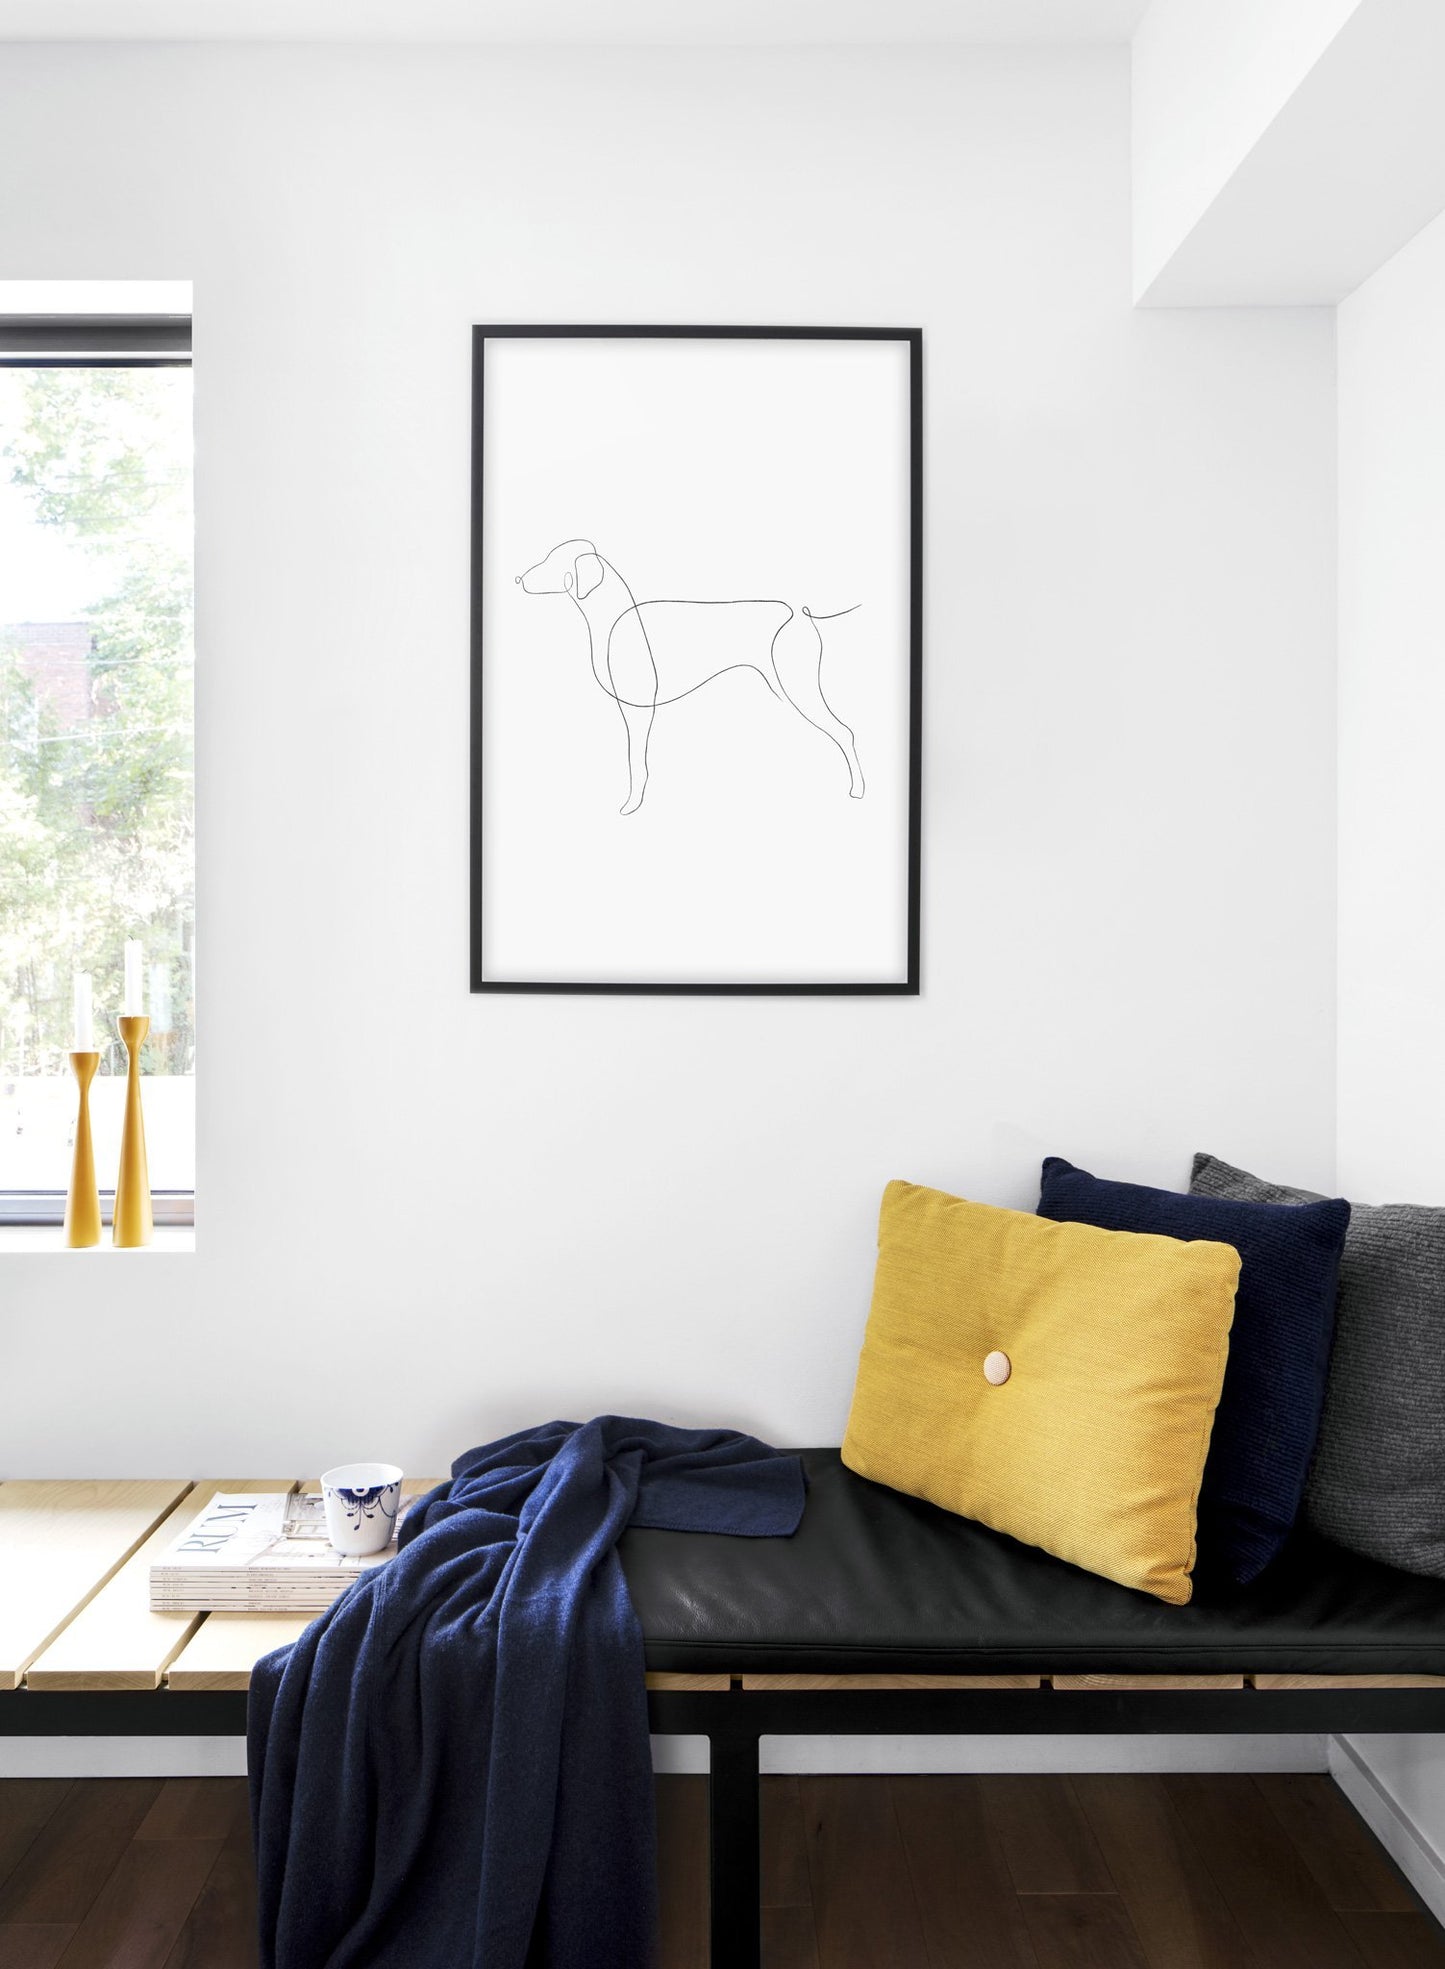 Modern minimalist poster by Opposite Wall with abstract illustration of dog line art - Bedroom